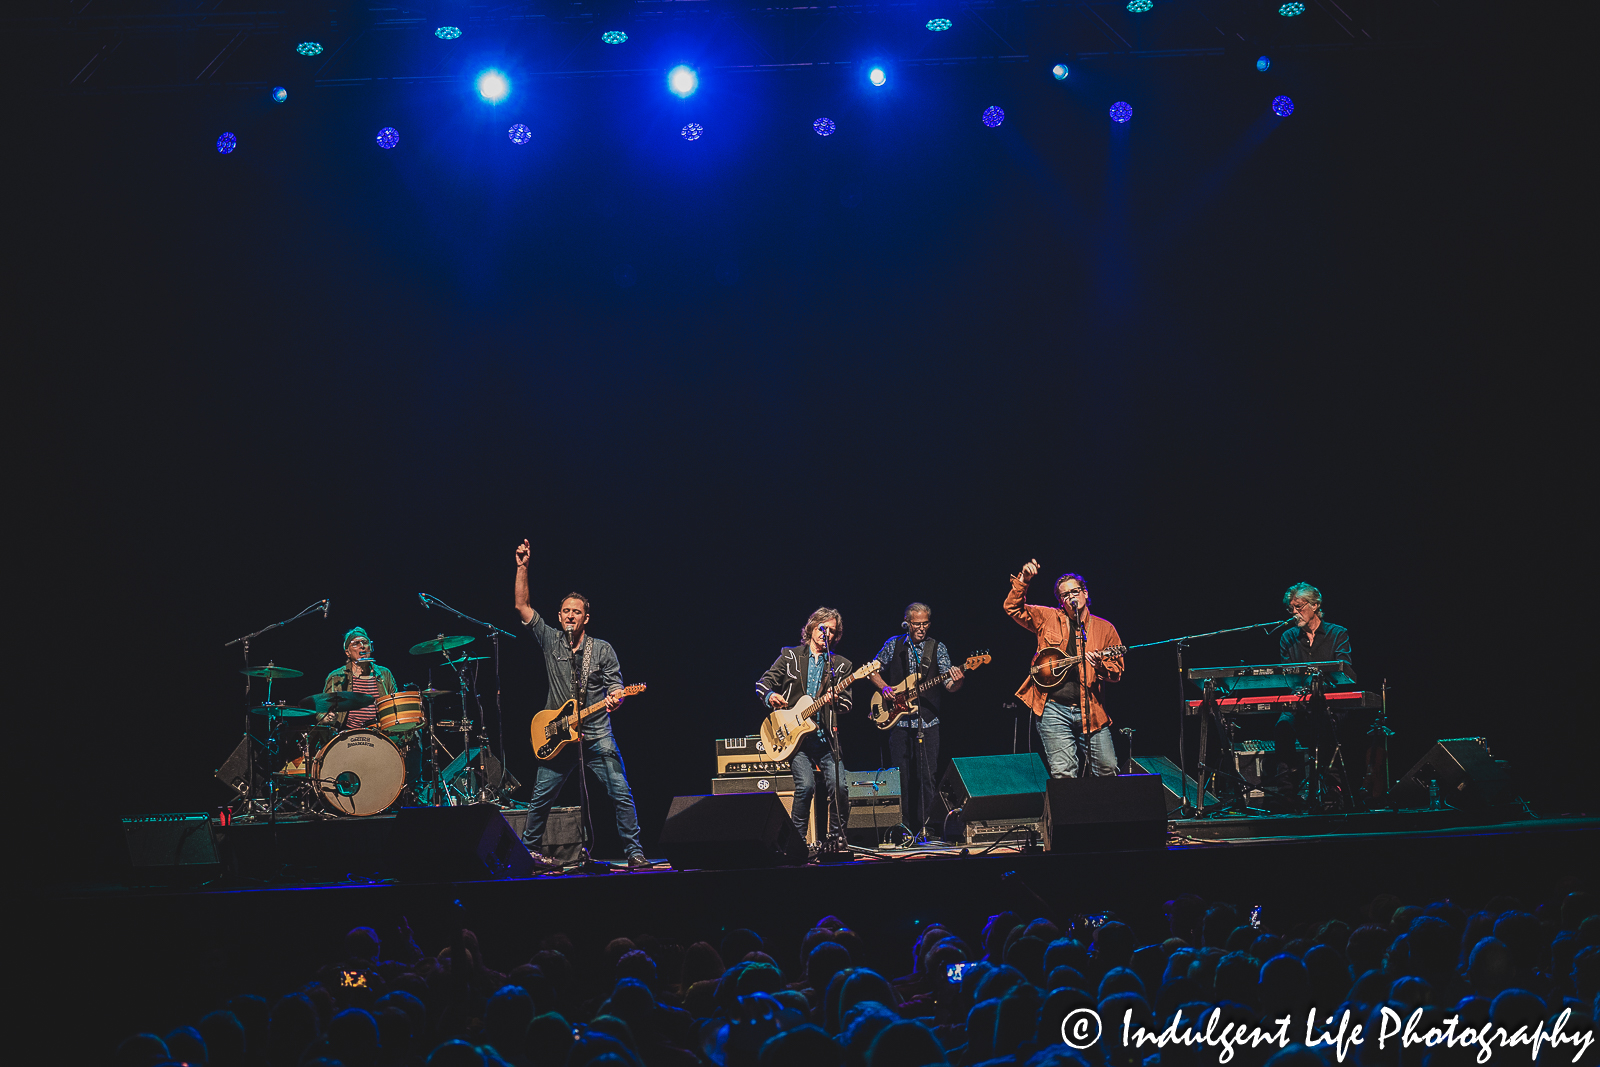 Nitty Gritty Dirt Band live performance at Ameristar Casino's Star Pavilion in Kansas City, MO on July 8, 2023.